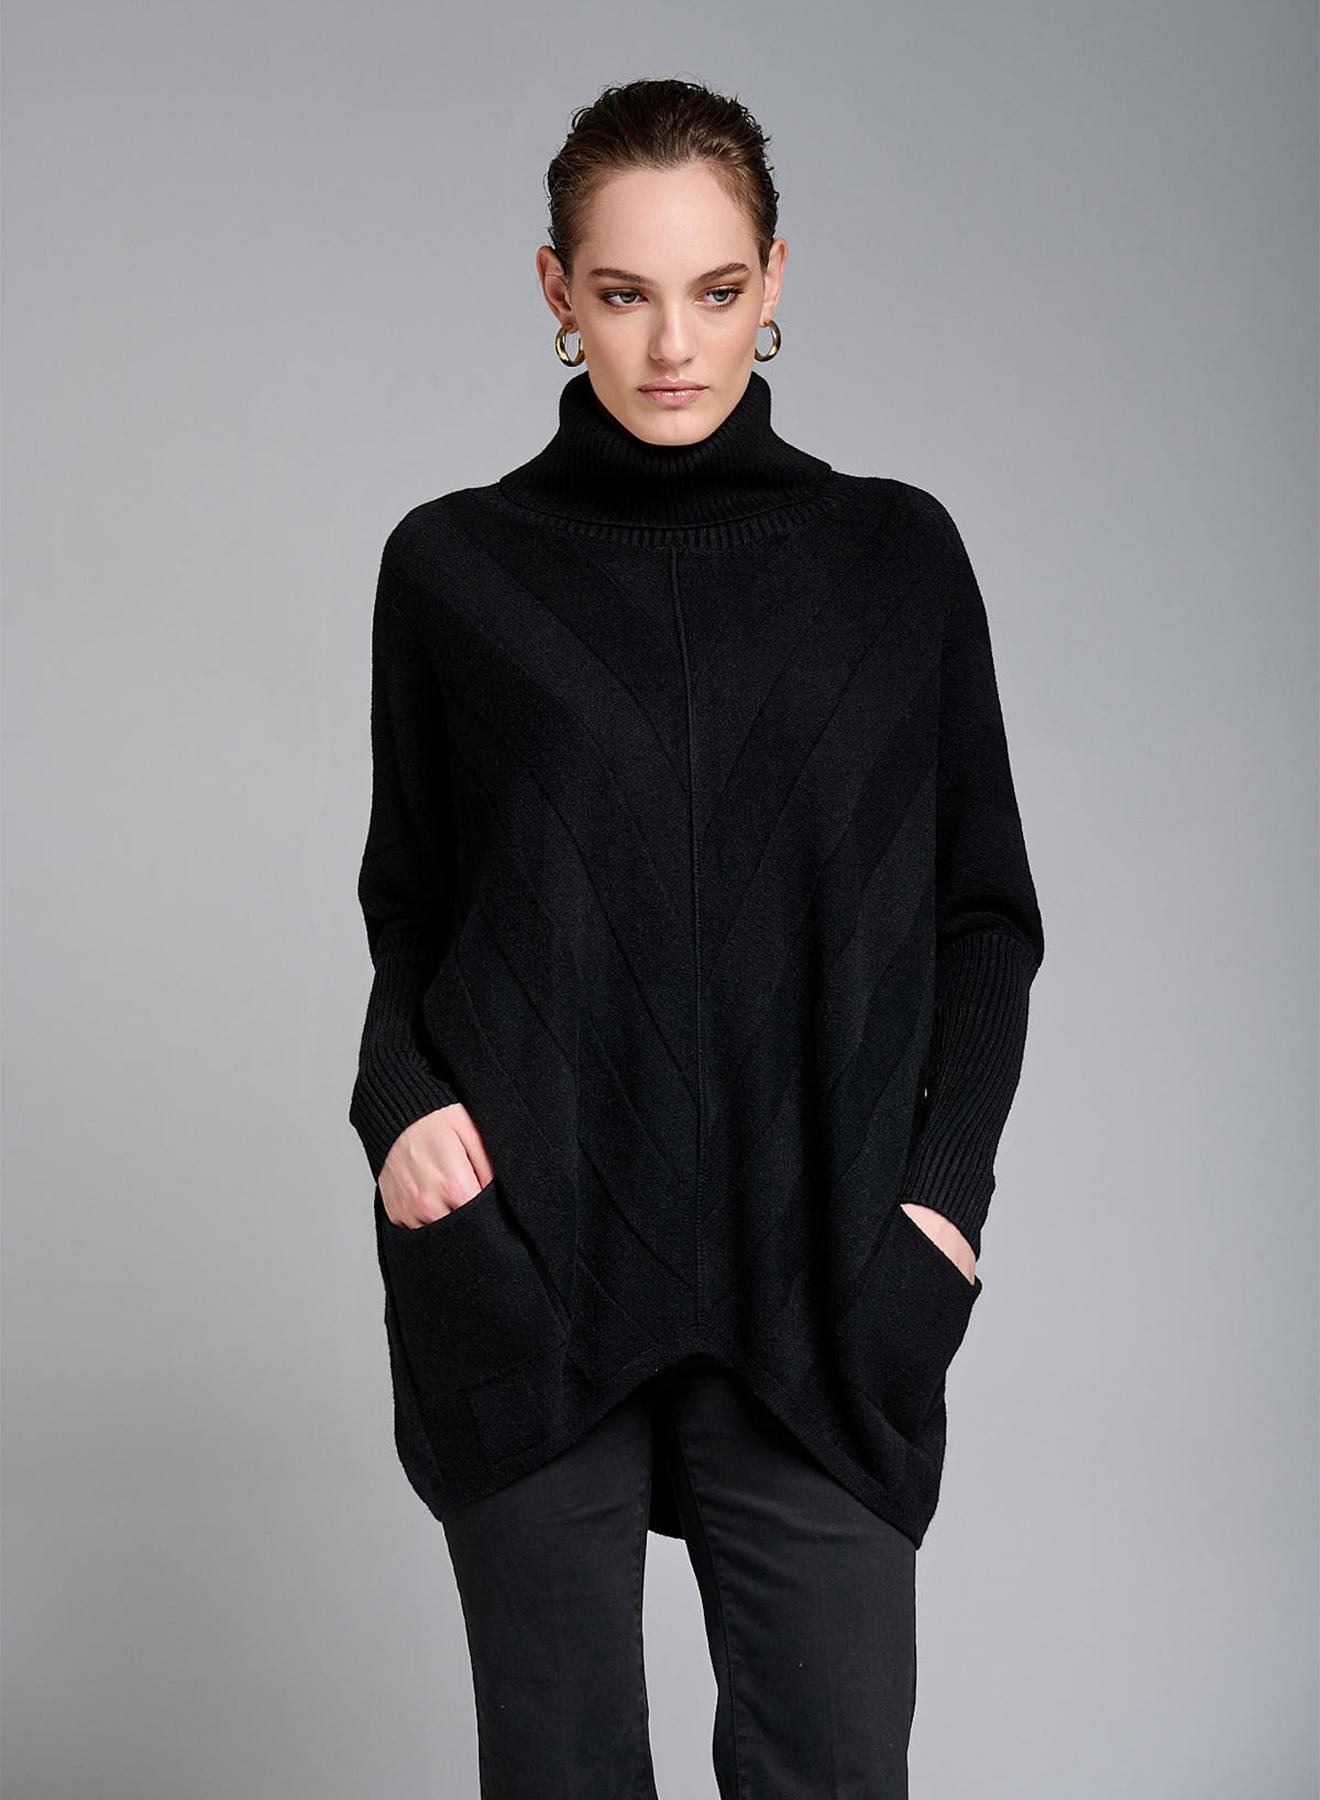 Oversized turtleneck sweater with textured details and pockets - 1